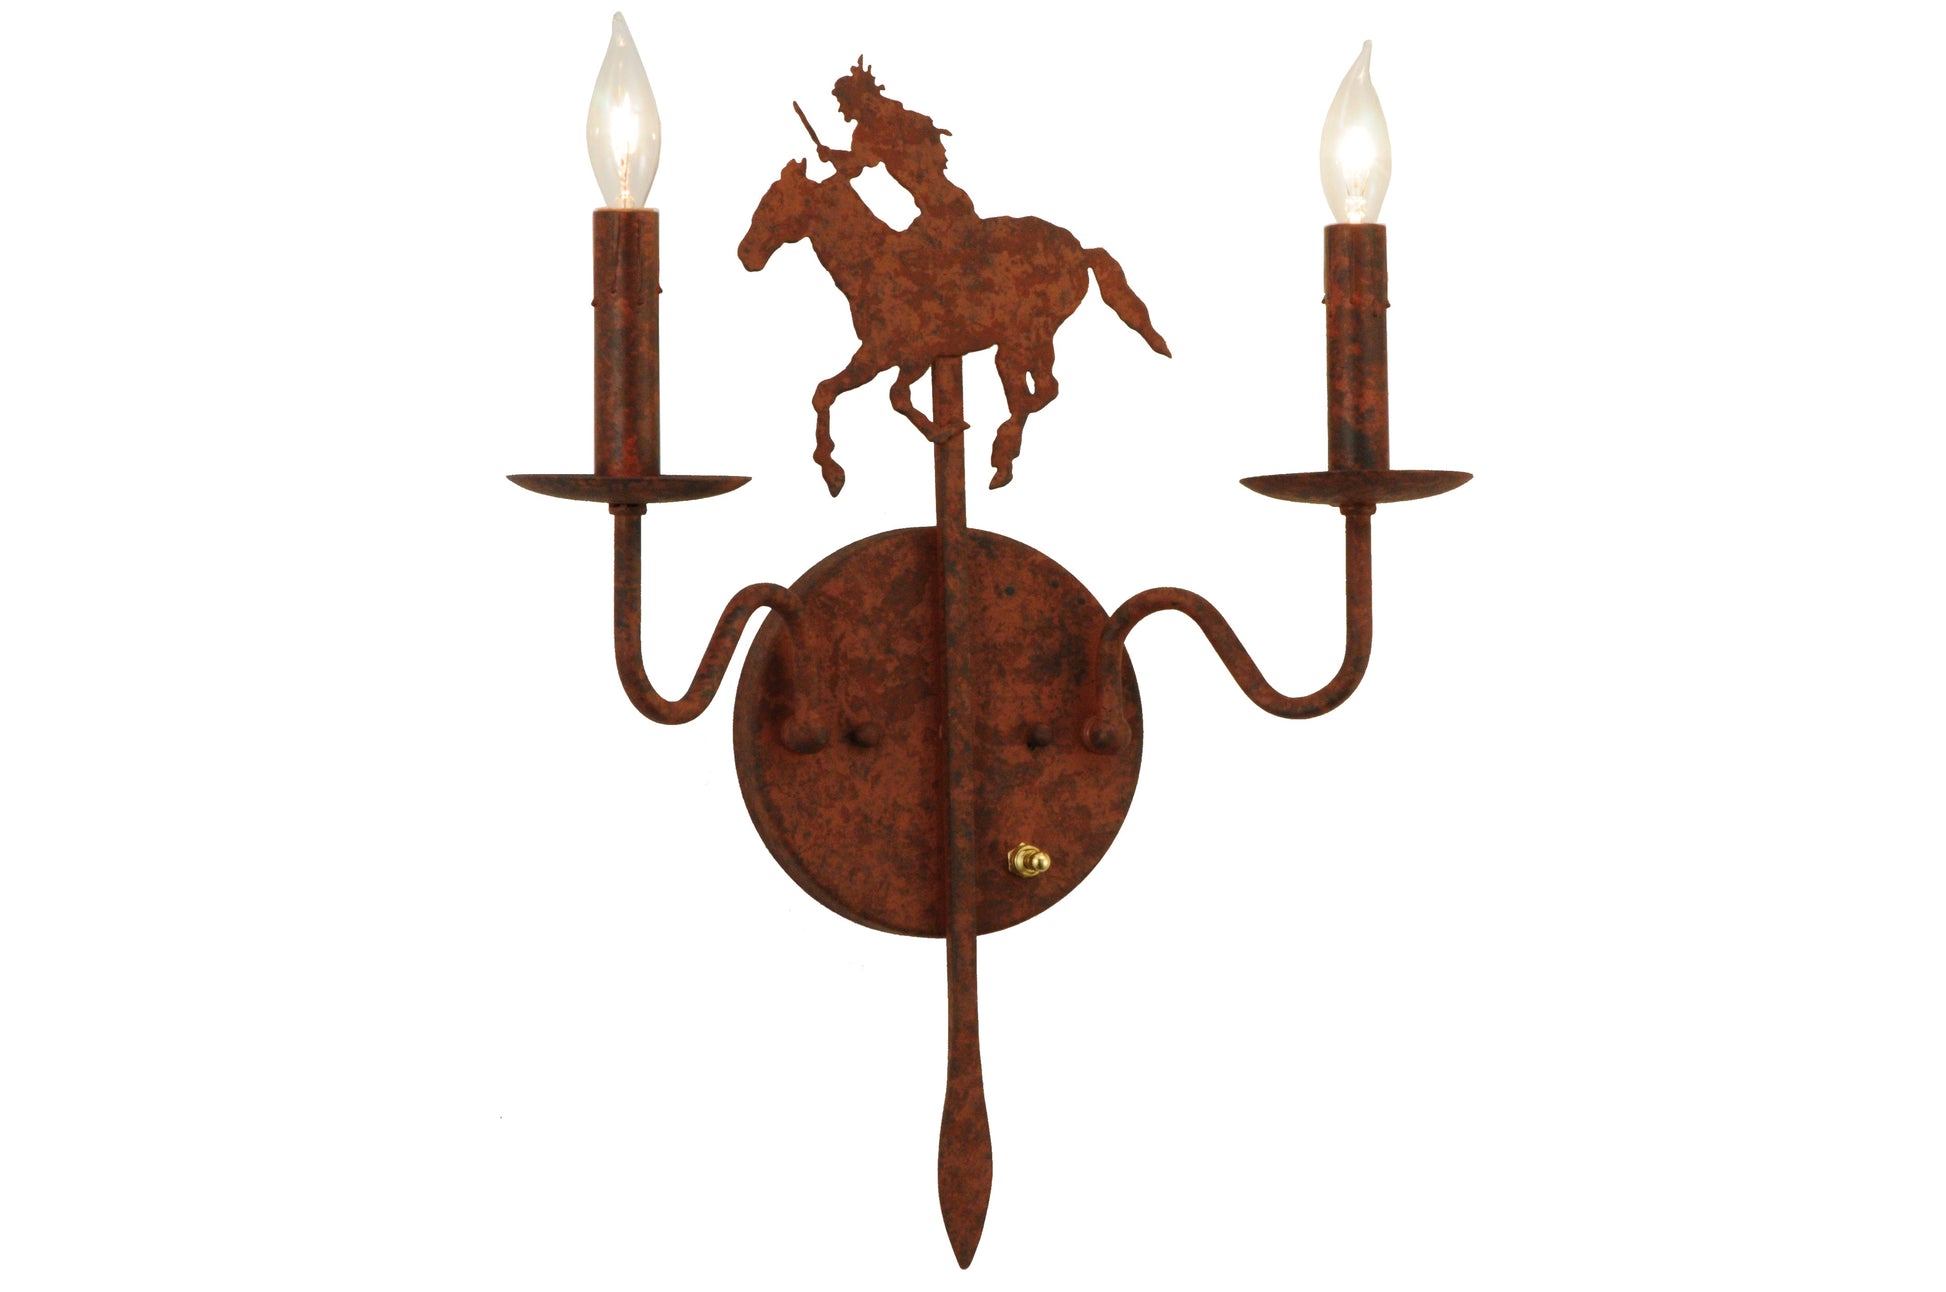 13" High Plains Rider 2-Light Wall Sconce by 2nd Ave Lighting